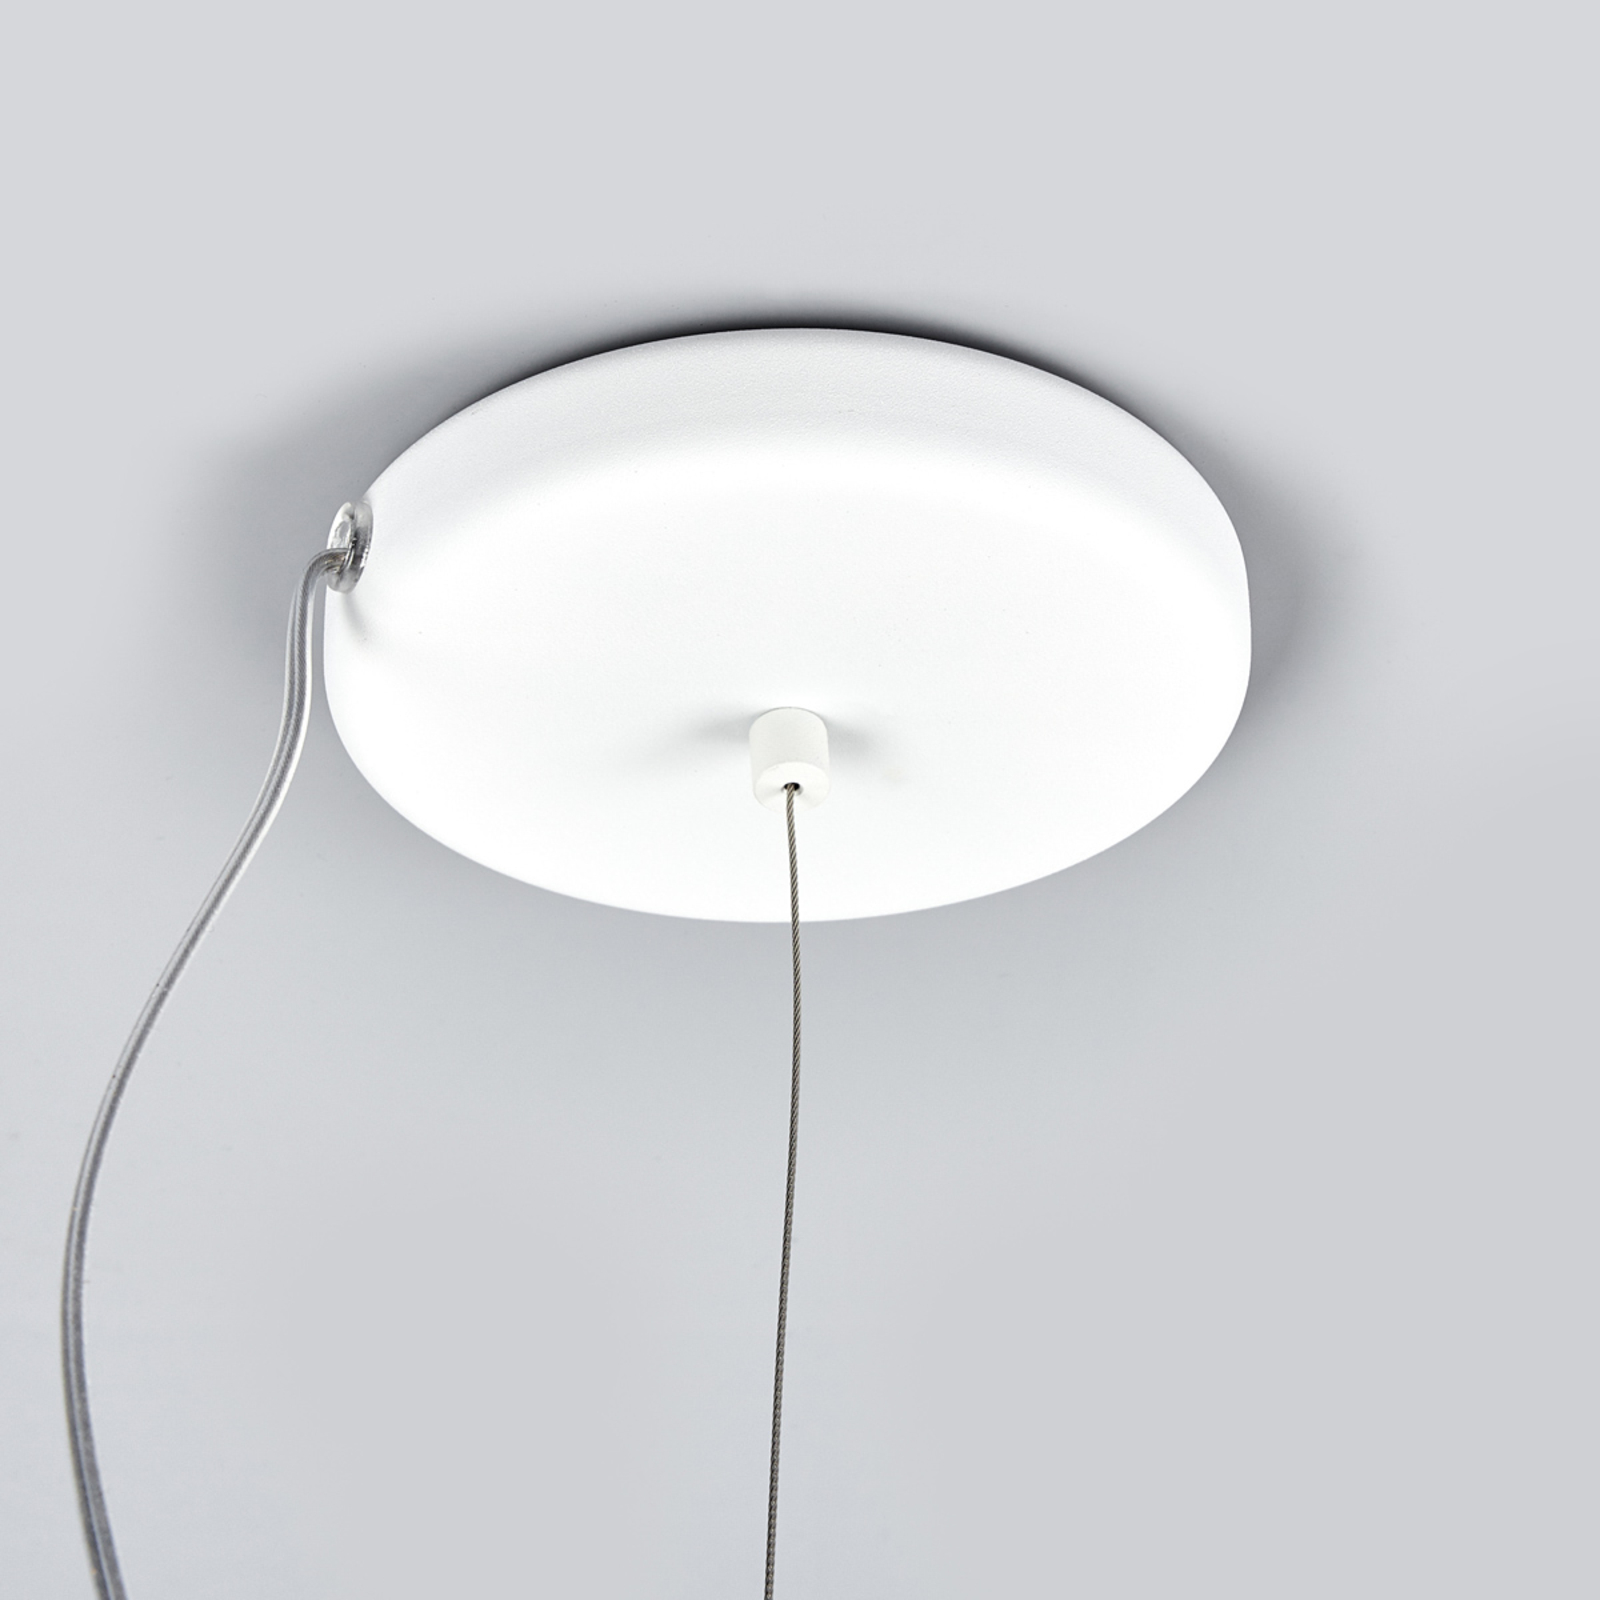 Wolkvormige LED hanglamp Cloudy, 26 cm